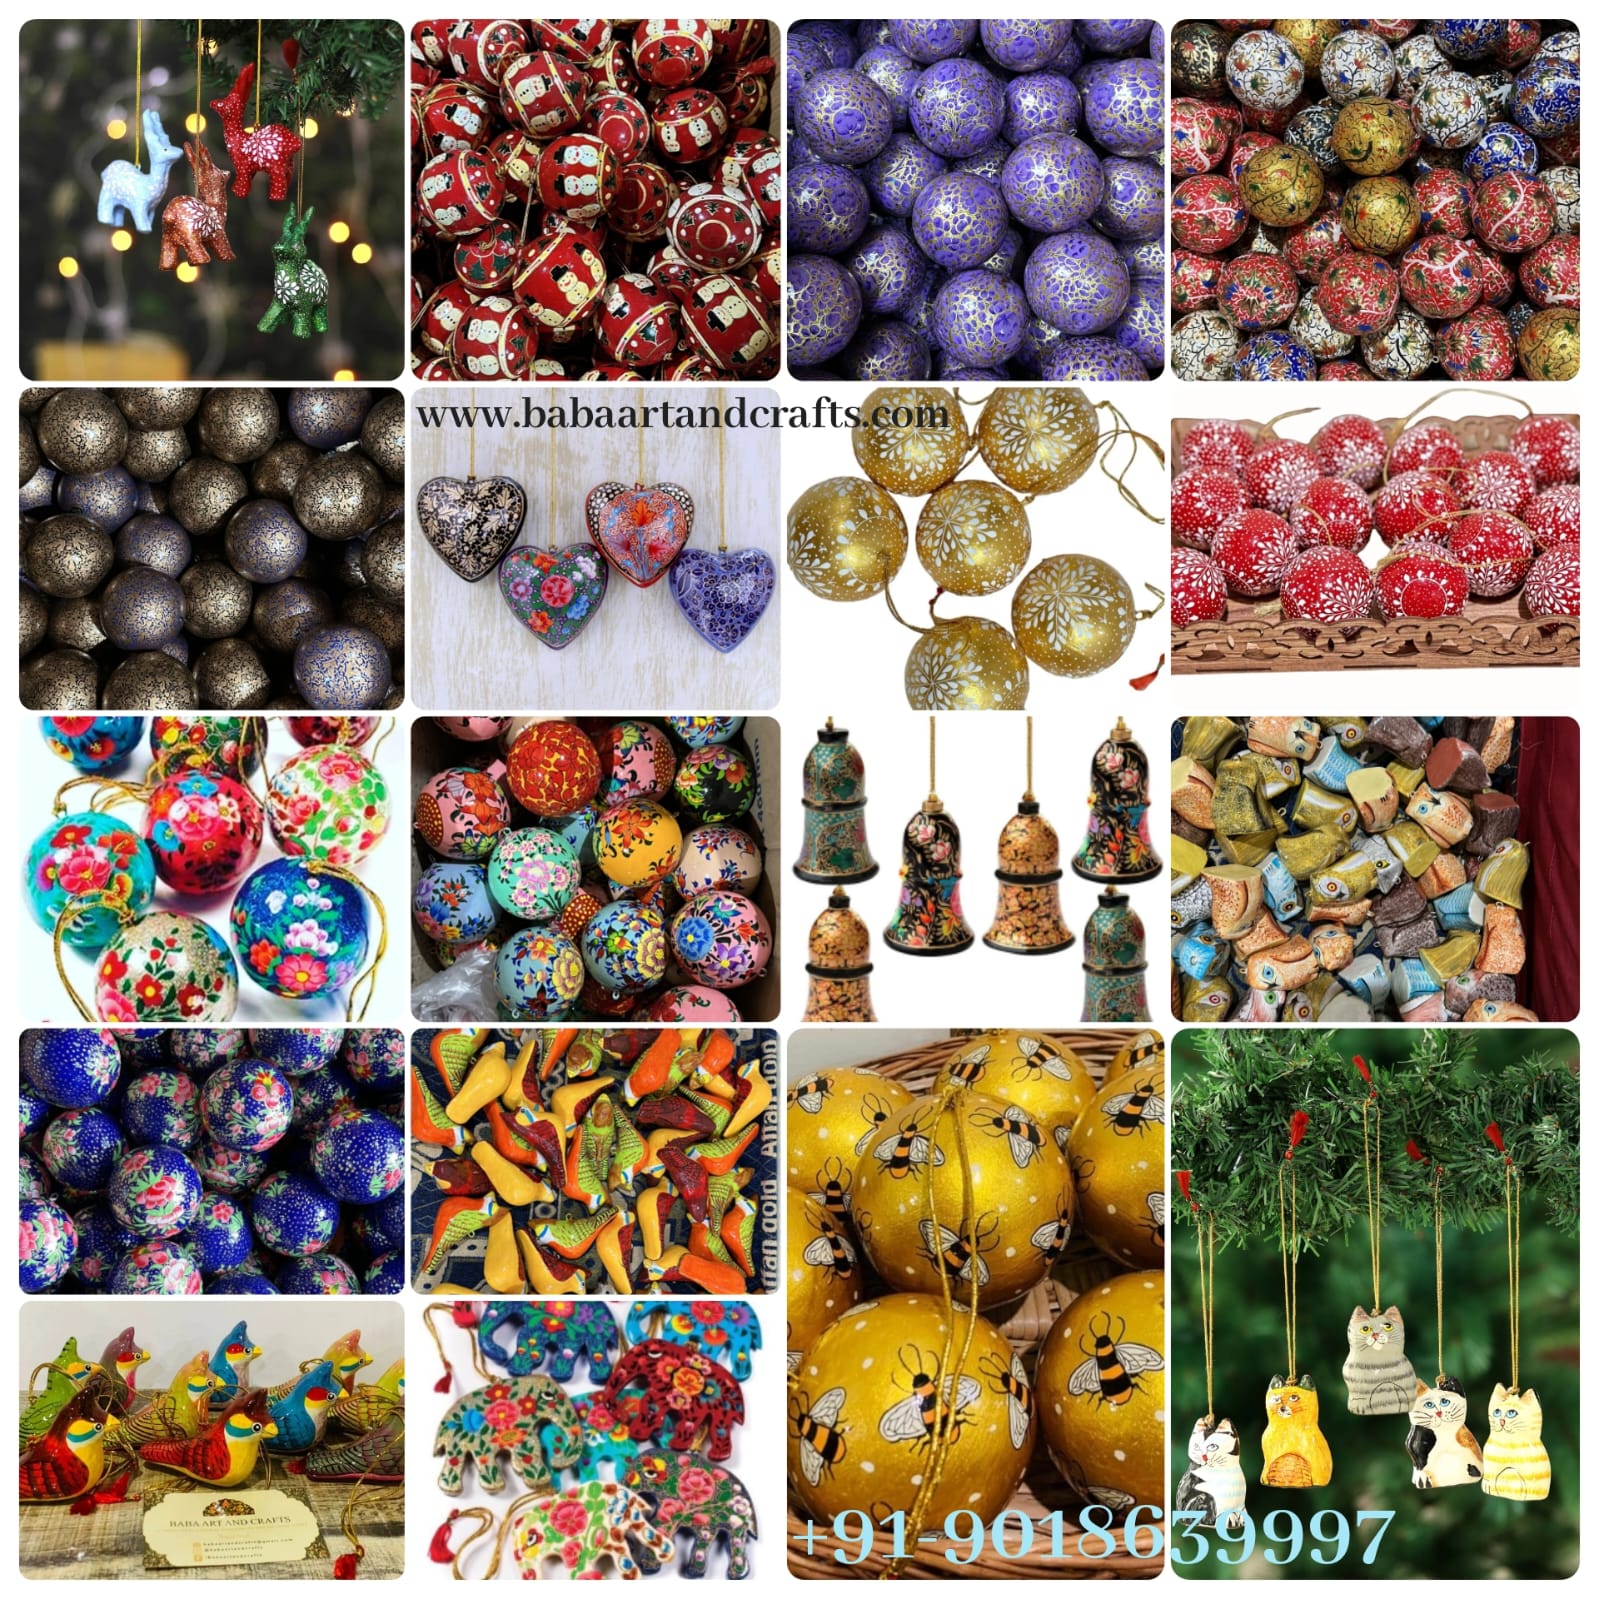 Wholesale Paper Mache Baubles - Kashmiri Paper Mache directly from Manufacturers in India